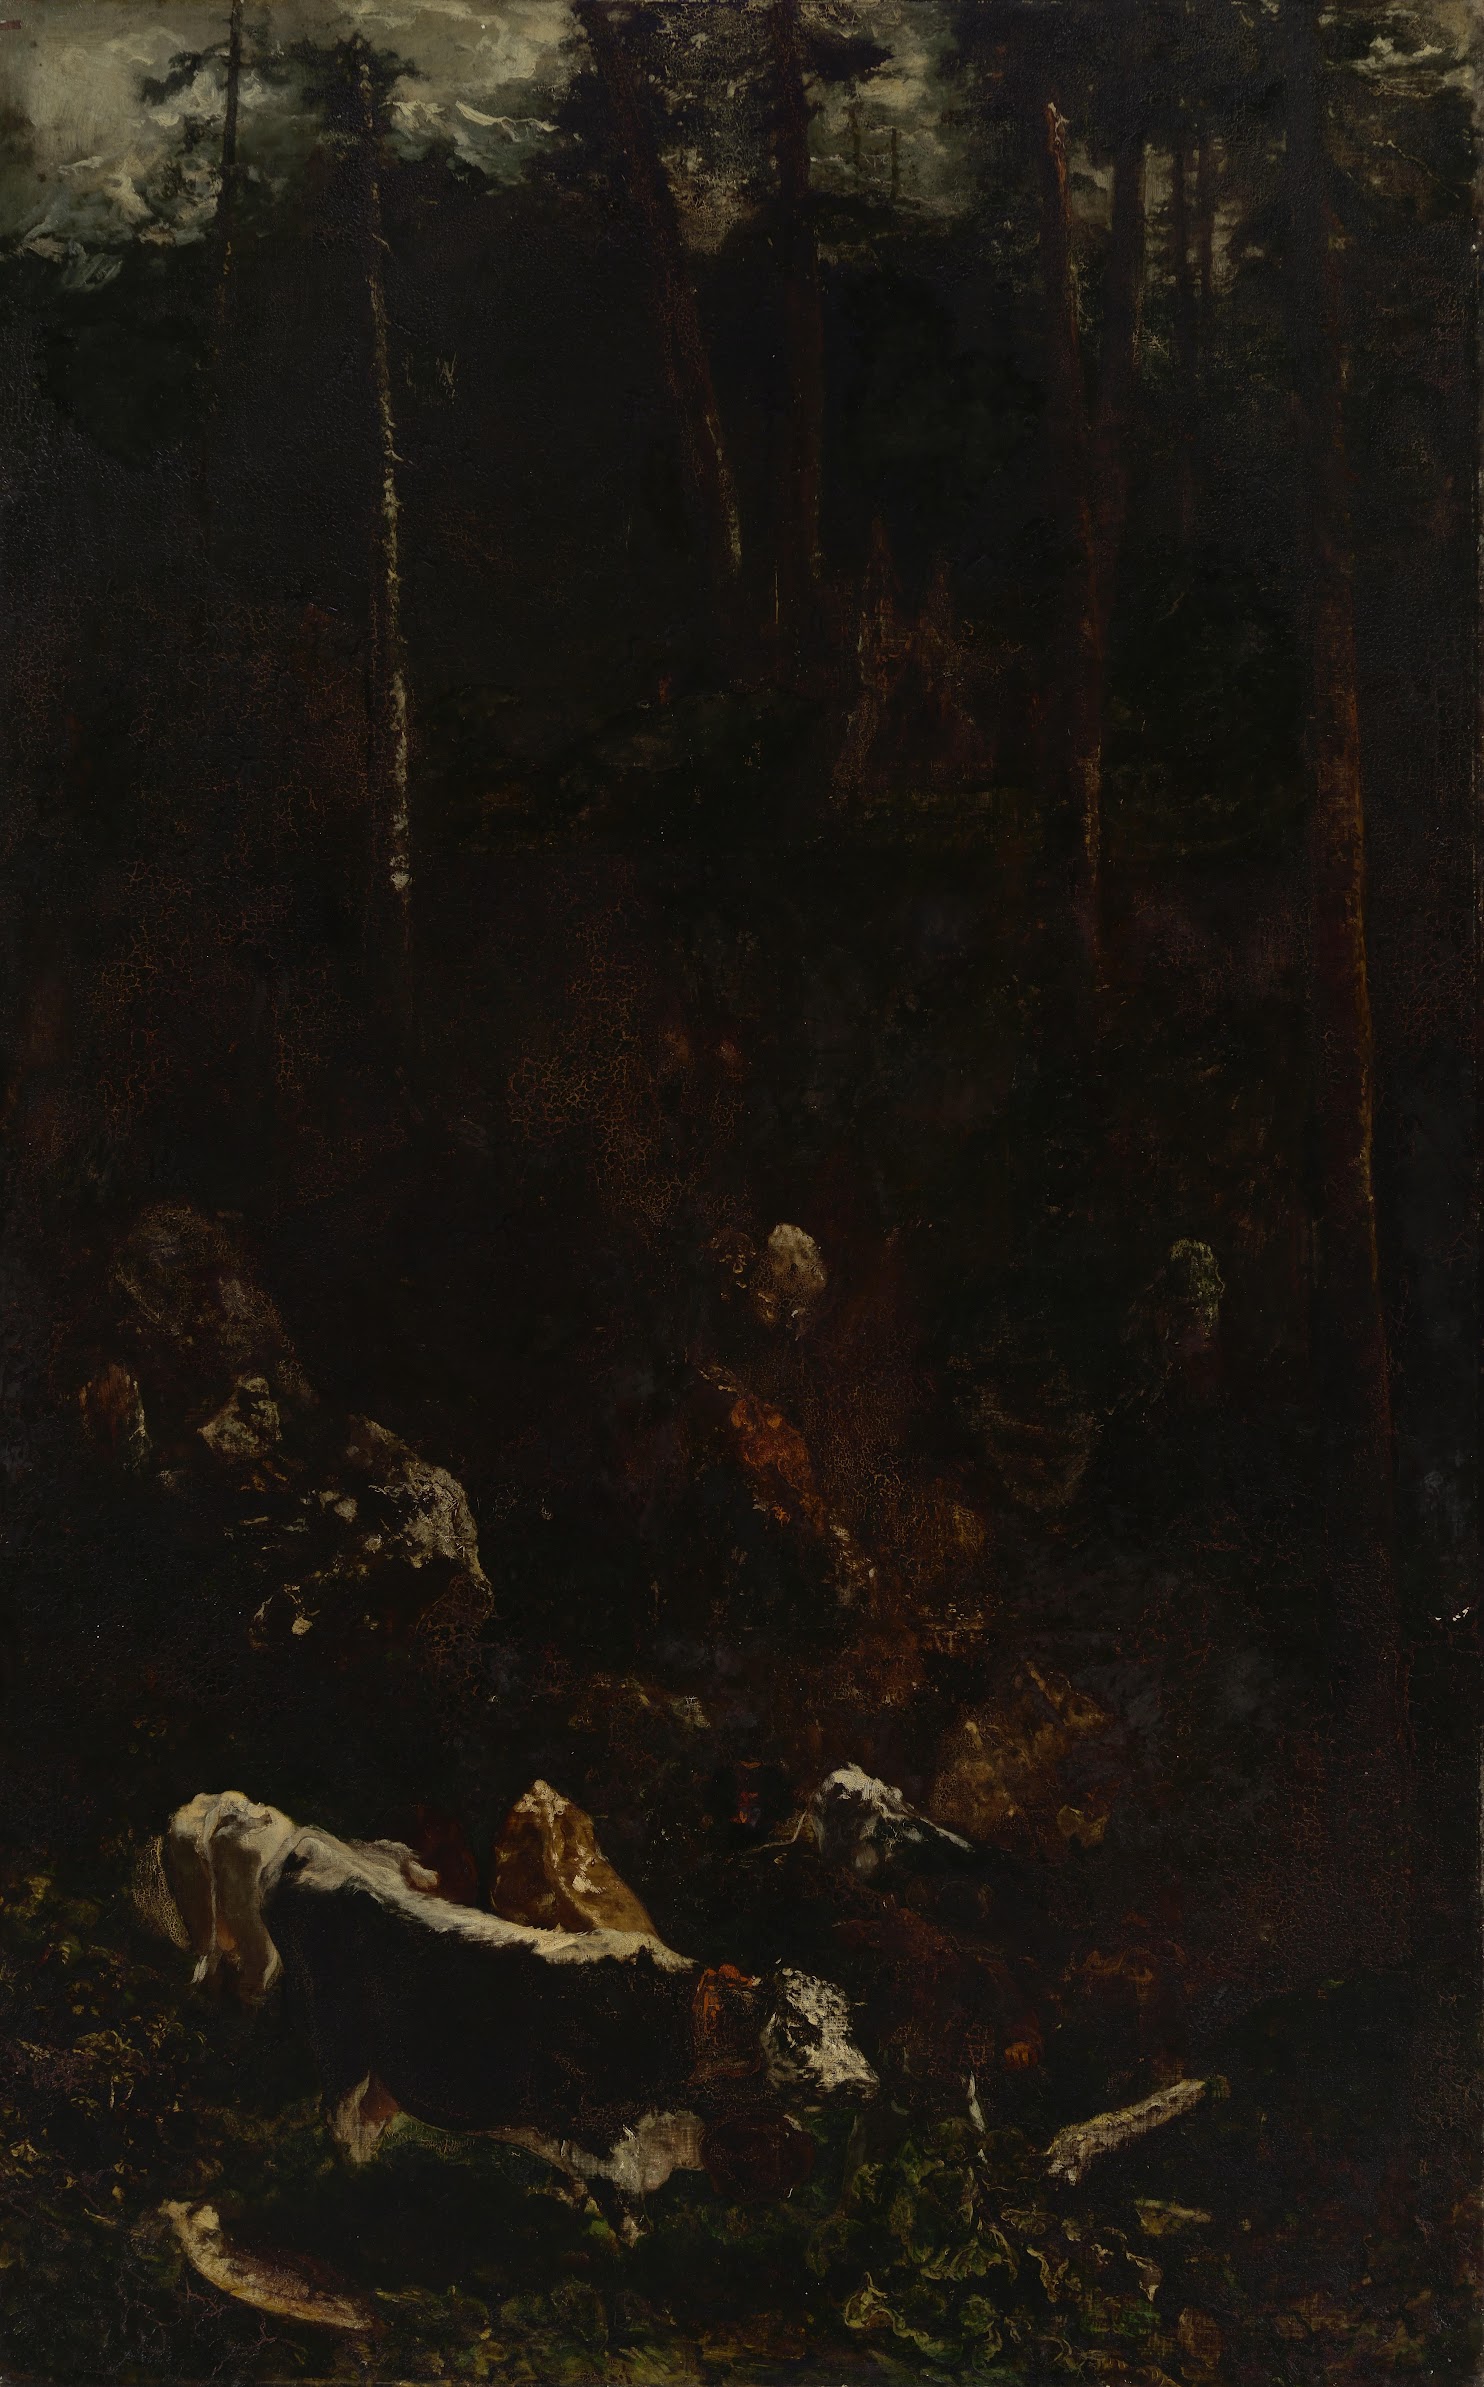 0513_Theodore Rousseau_The Descent of the Cattle in the High Jura Mountains 썸네일